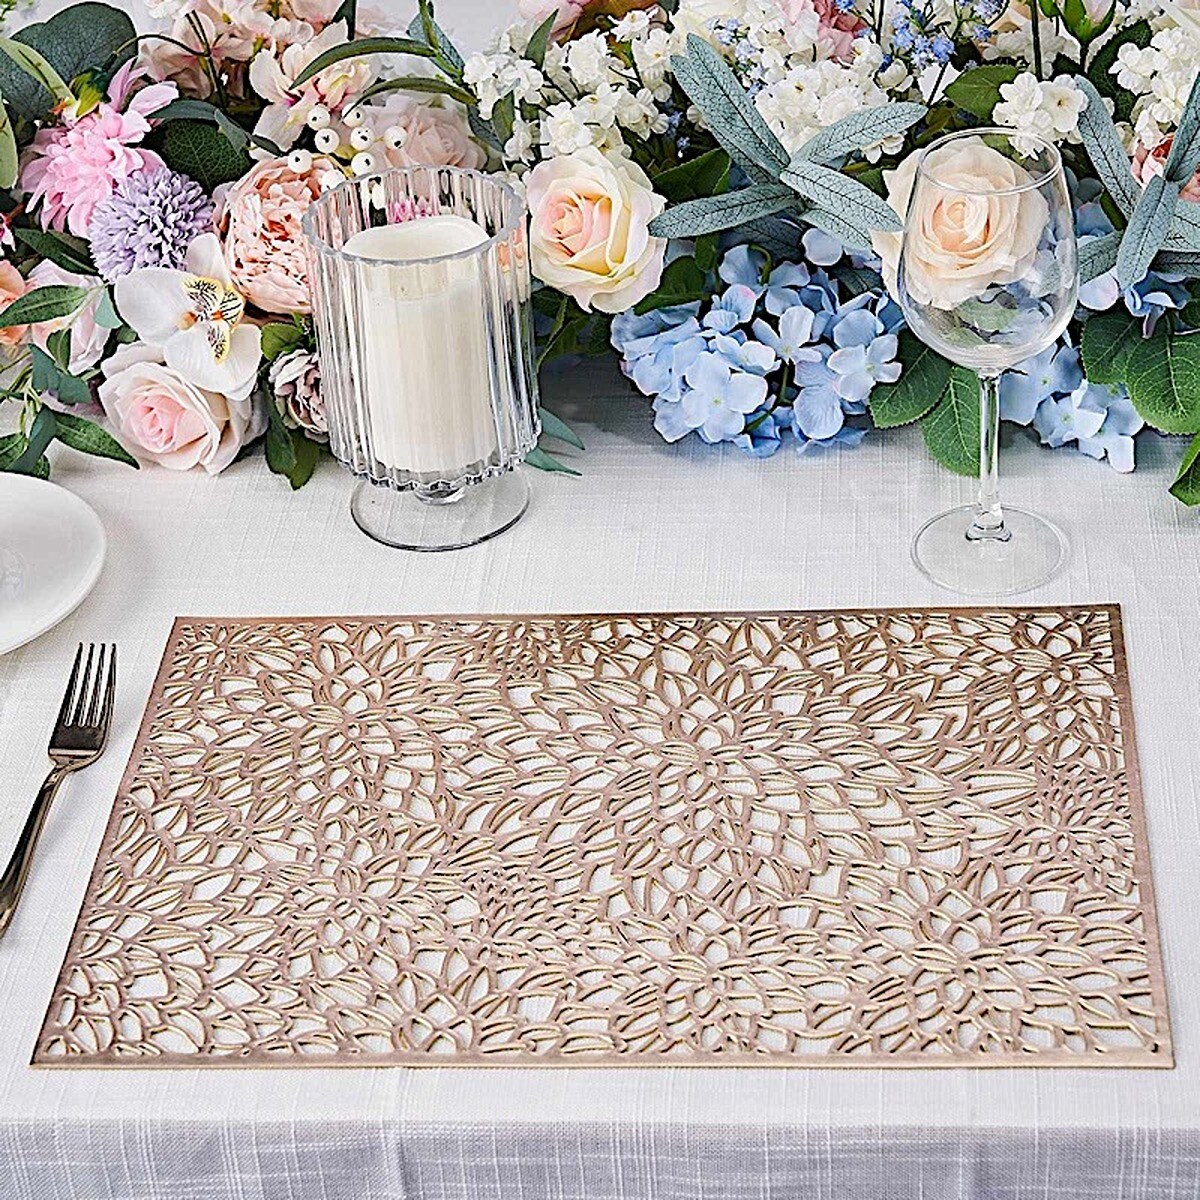 18 Inches Elegant Floral Placemat